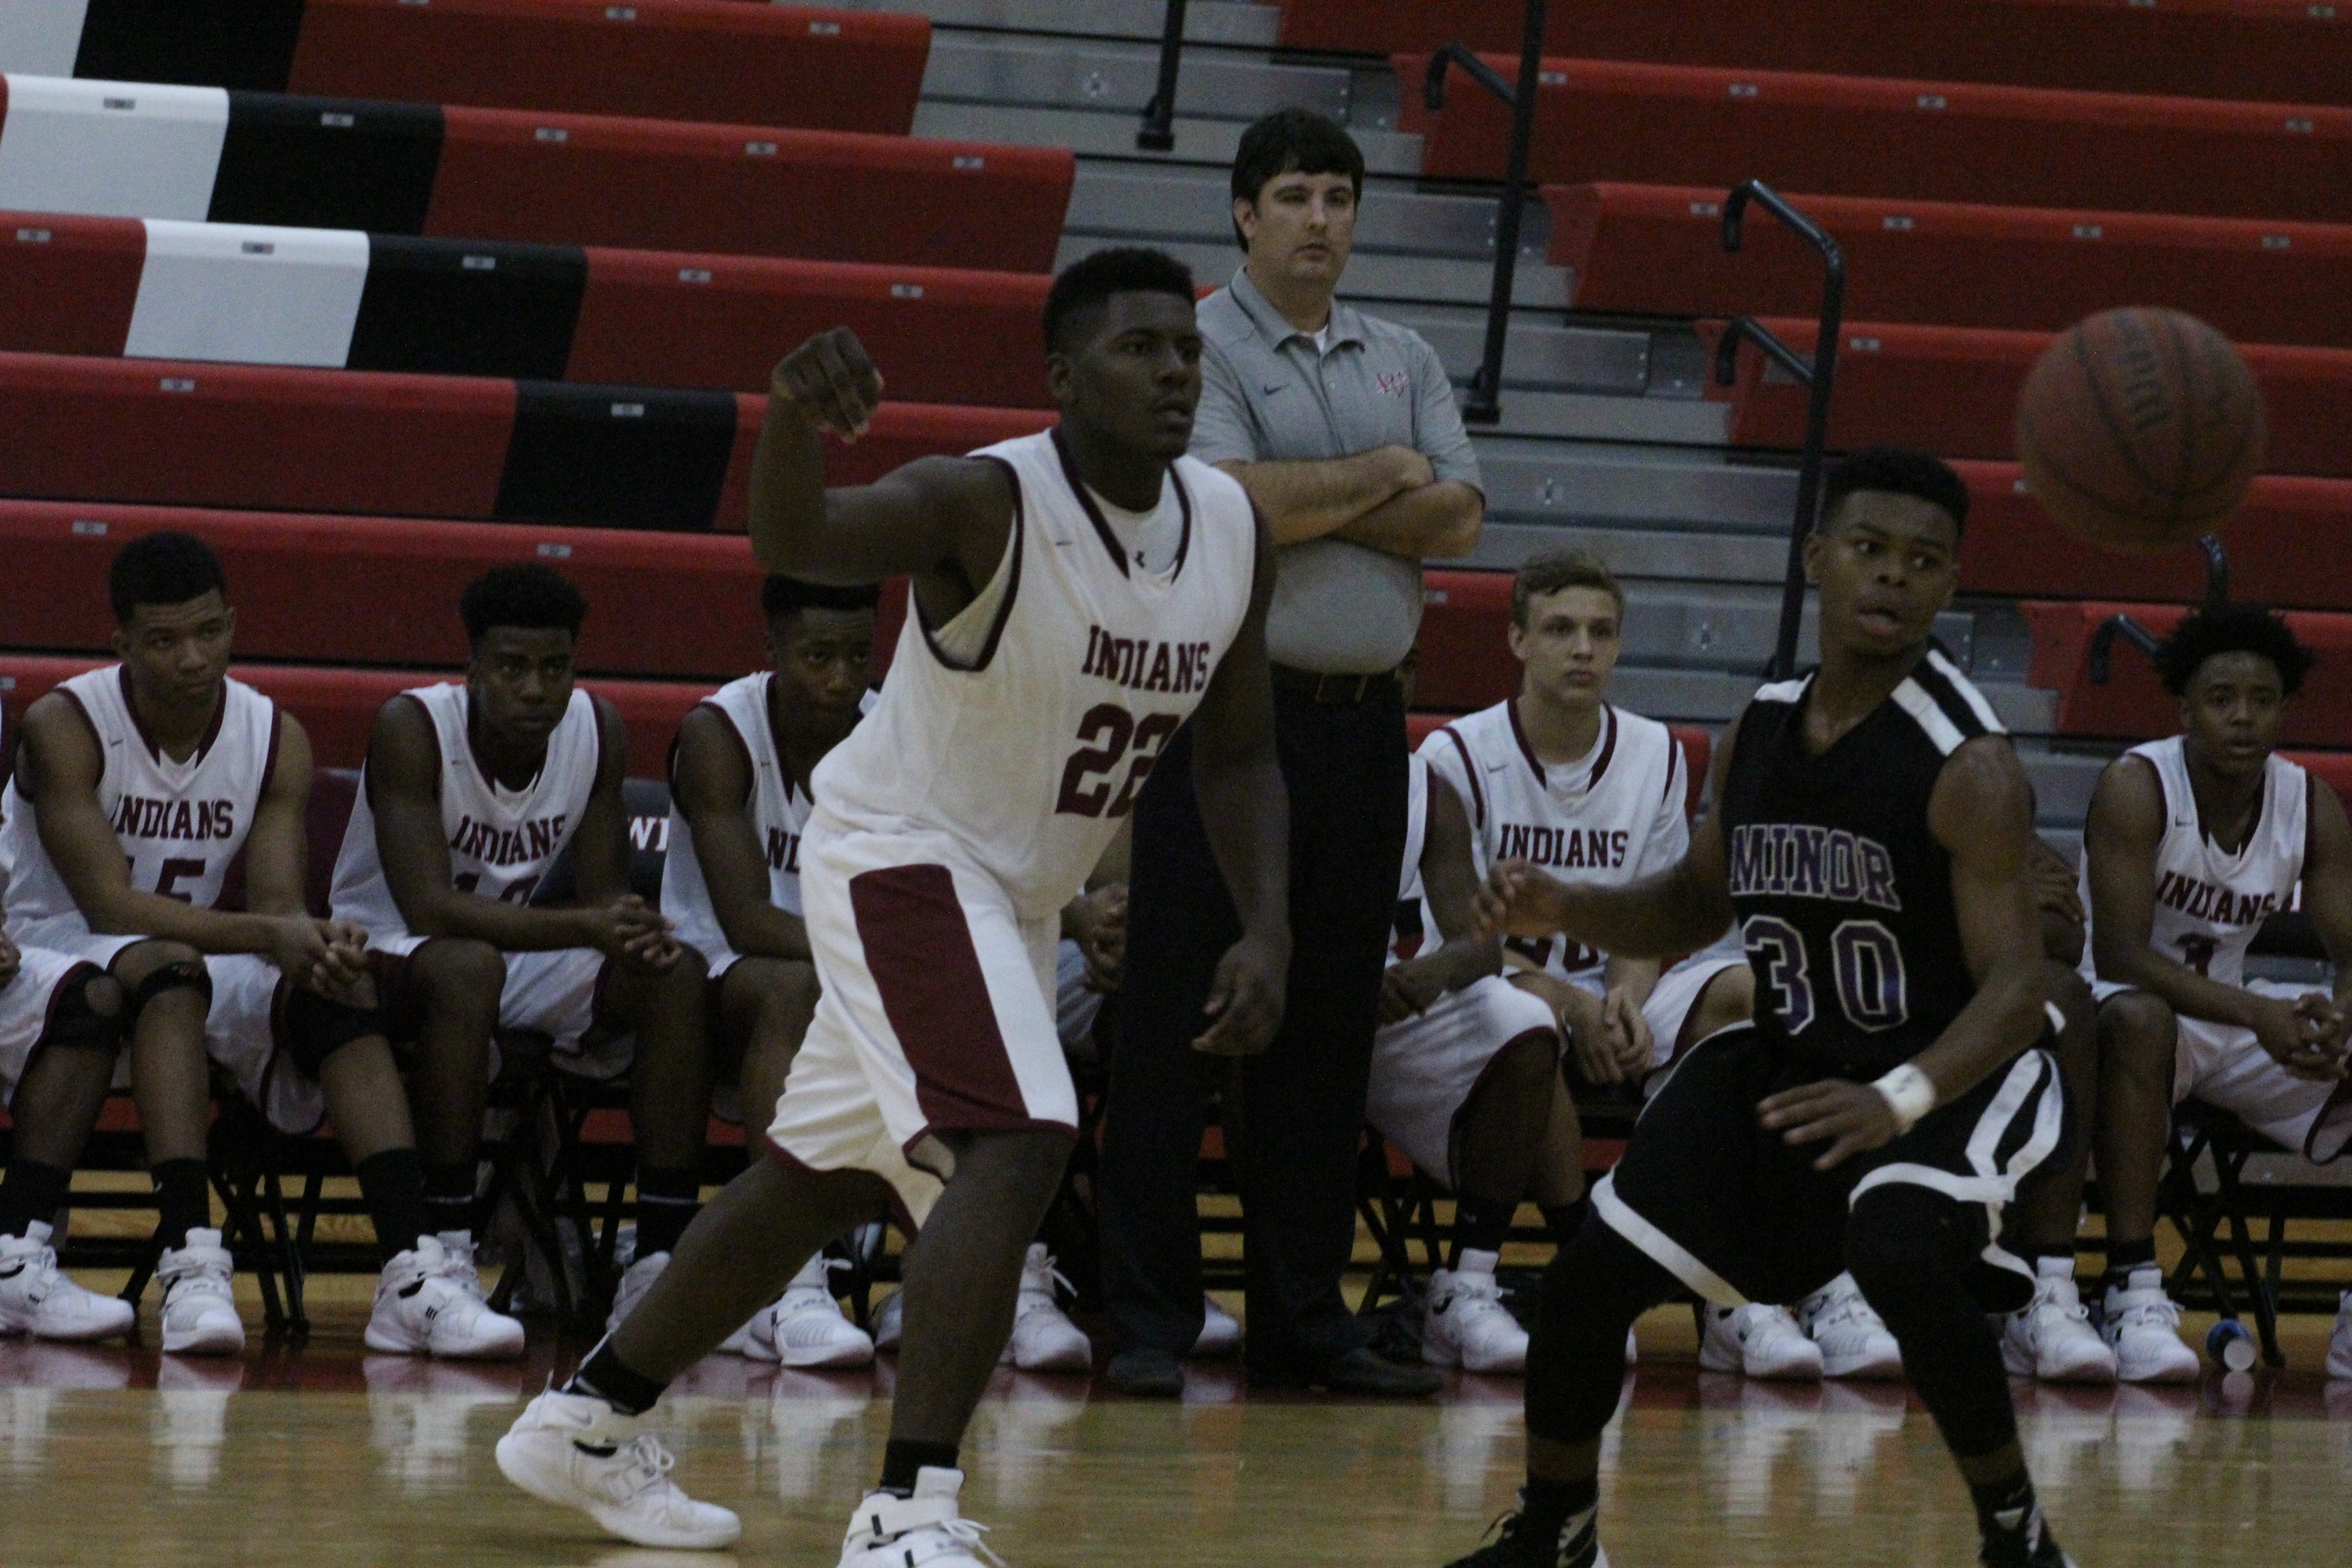 Clay-Chalkville, Pinson Valley start tournament with loss